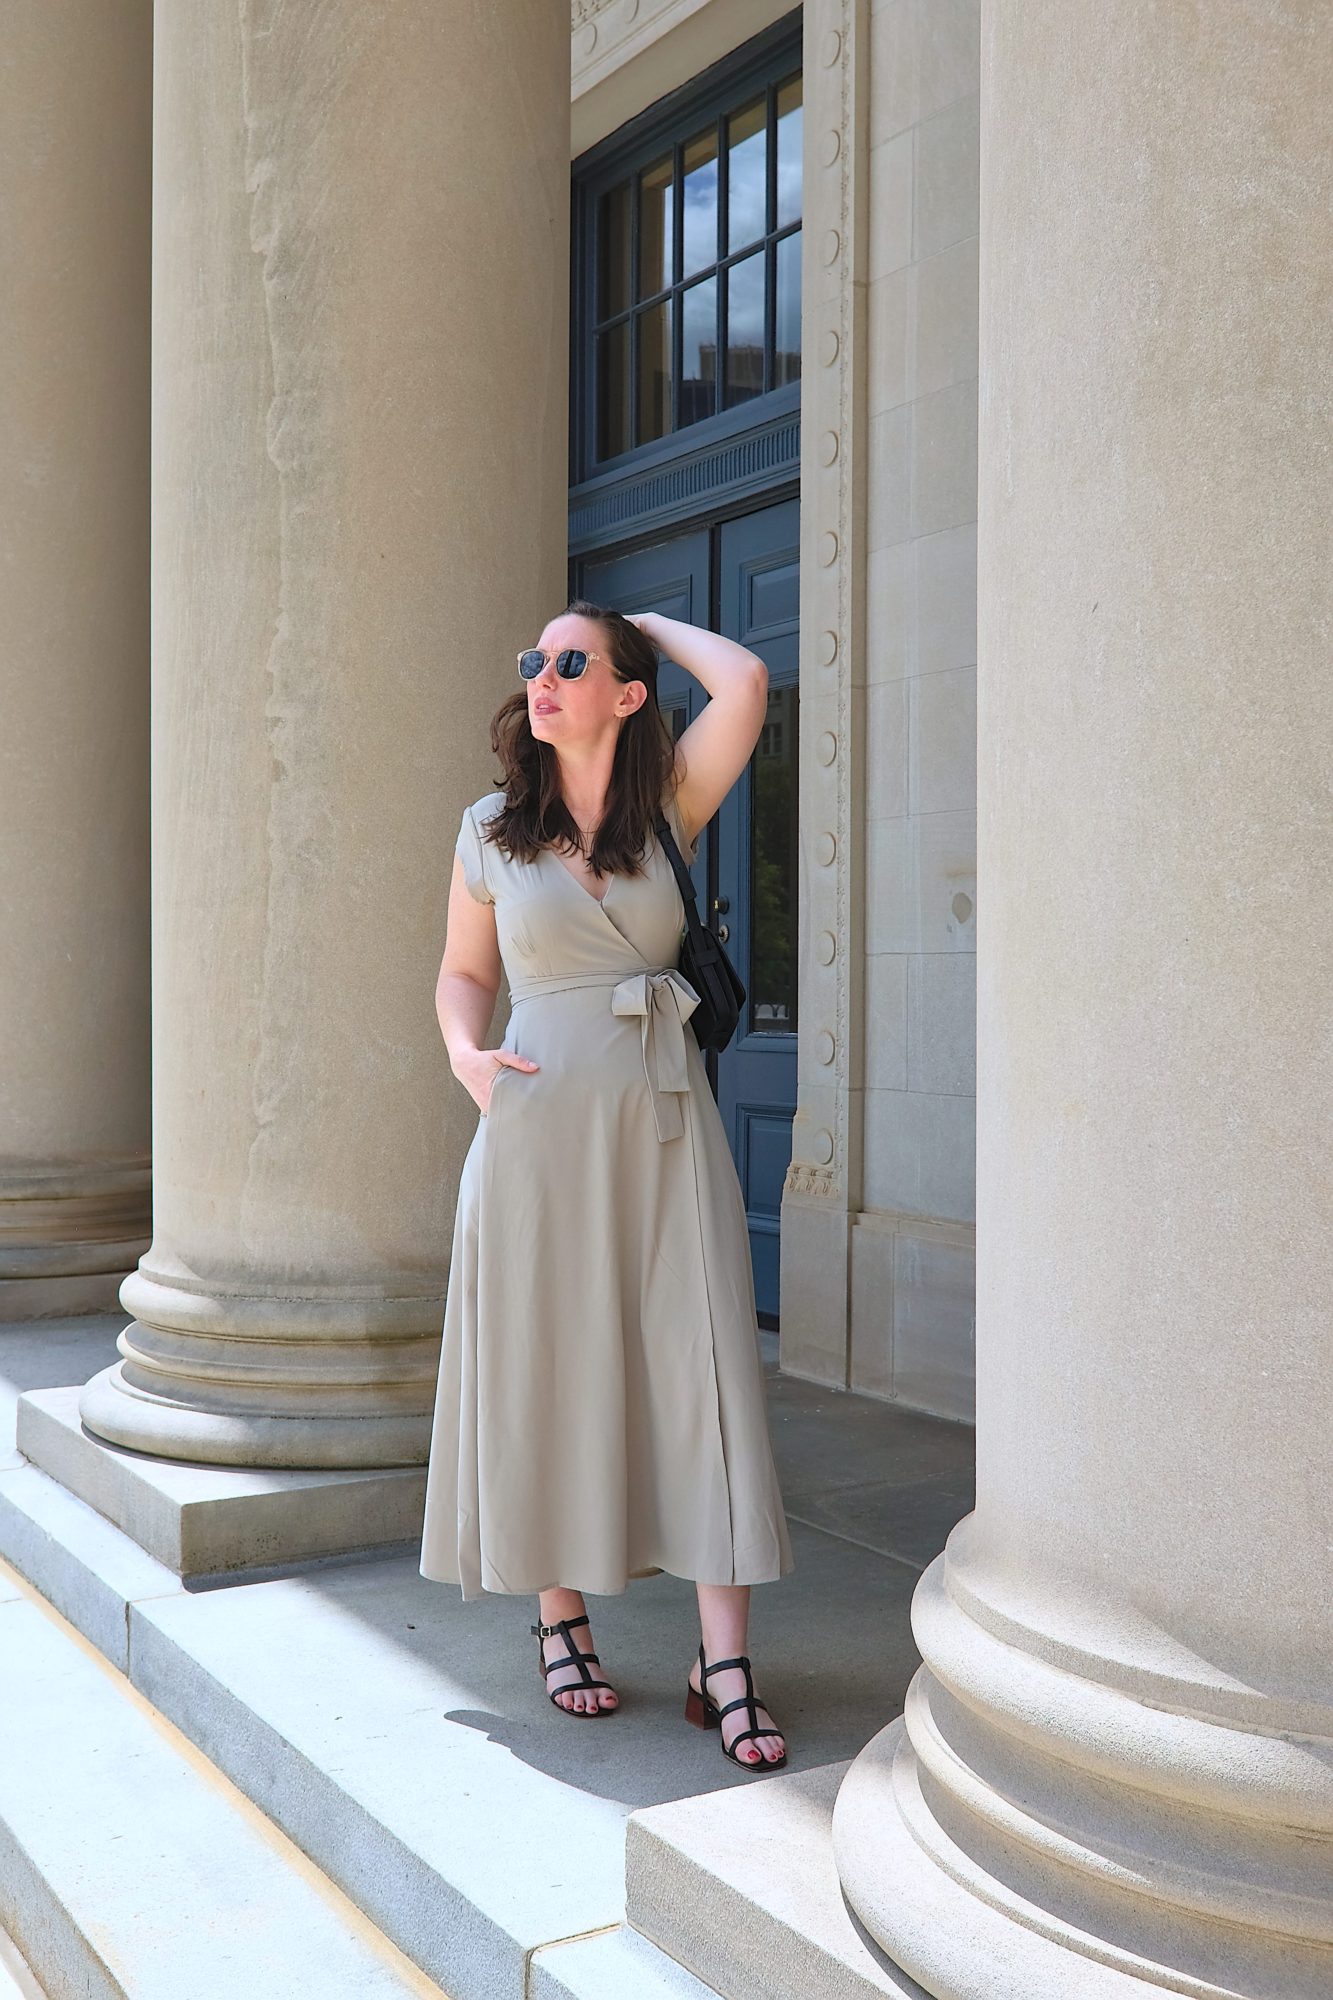 Alyssa wears the Roma dress with black heeled sandals and sunglasses